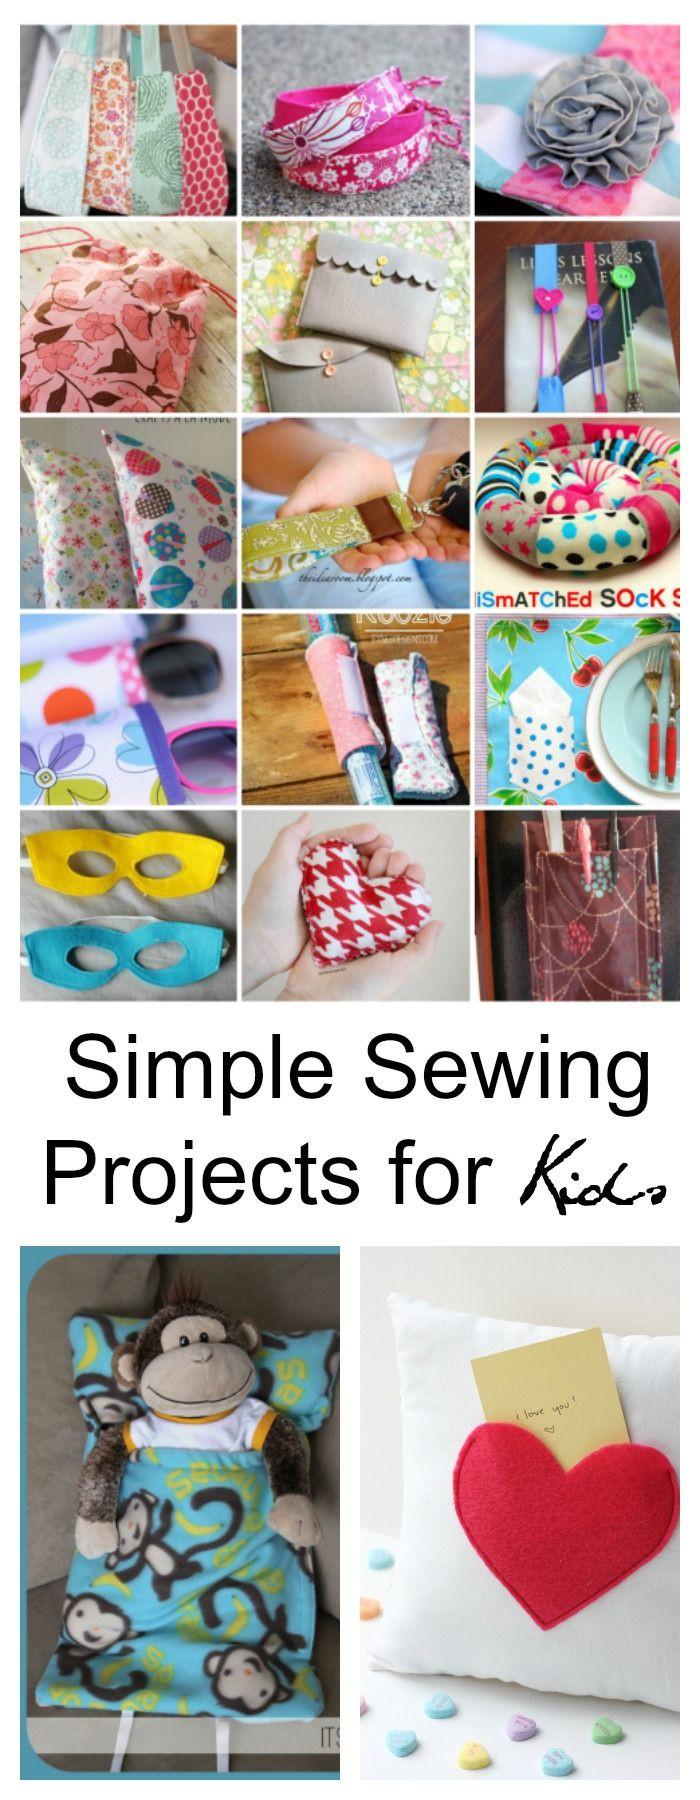 Simple Projects For Kids
 Simple Sewing Projects for Kids